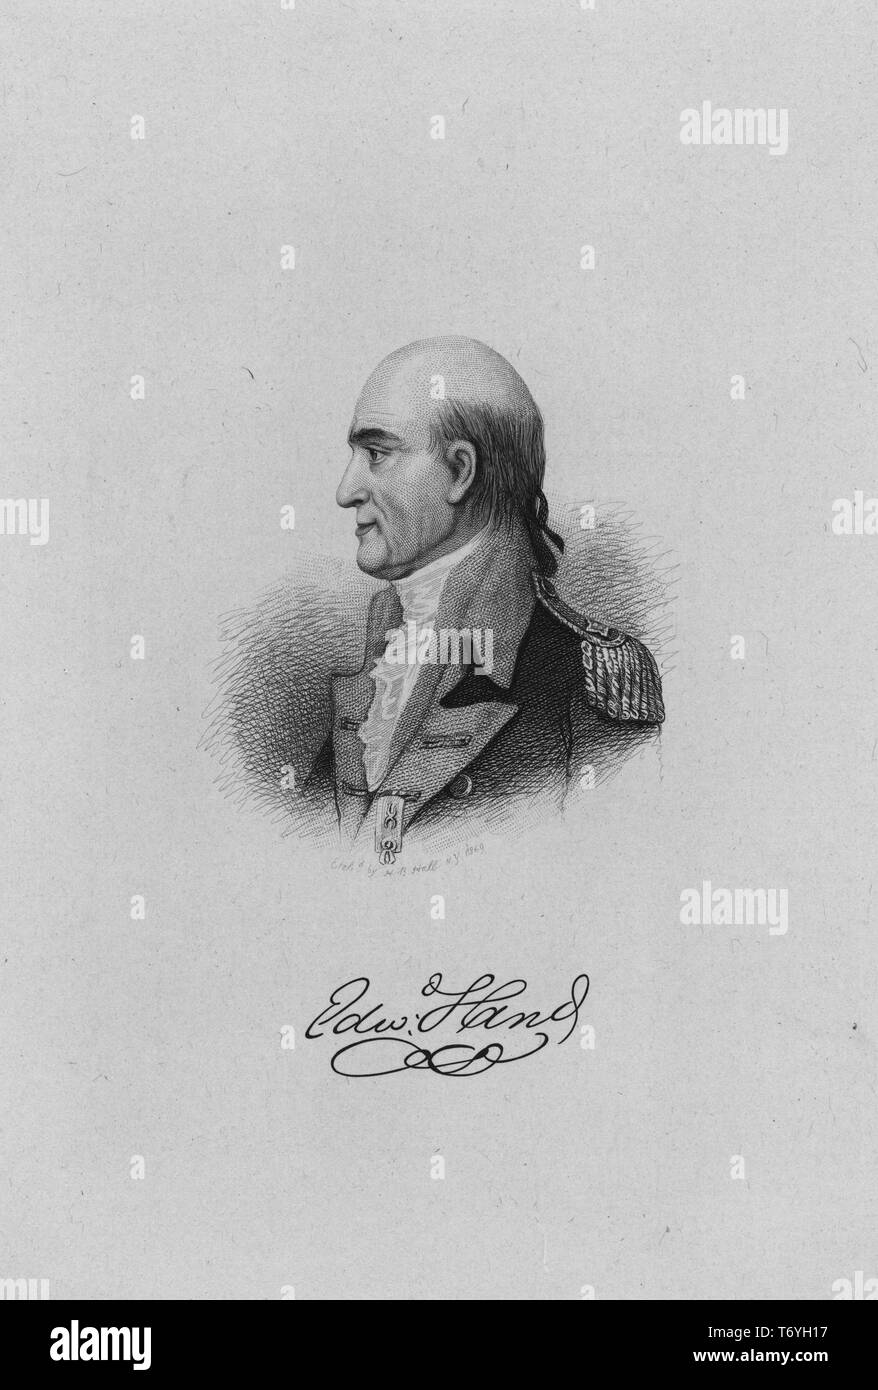 Black and white vintage print of Edward Hand, an American Revolutionary War General, physician, and Pennsylvania politician, depicted from the chest up, in profile, with a receding hairline and a relaxed expression on his face, wearing a military jacket with epaulets on the shoulders, and an ascot tie, from an etching by HB Hall, 1869. From the New York Public Library. () Stock Photo